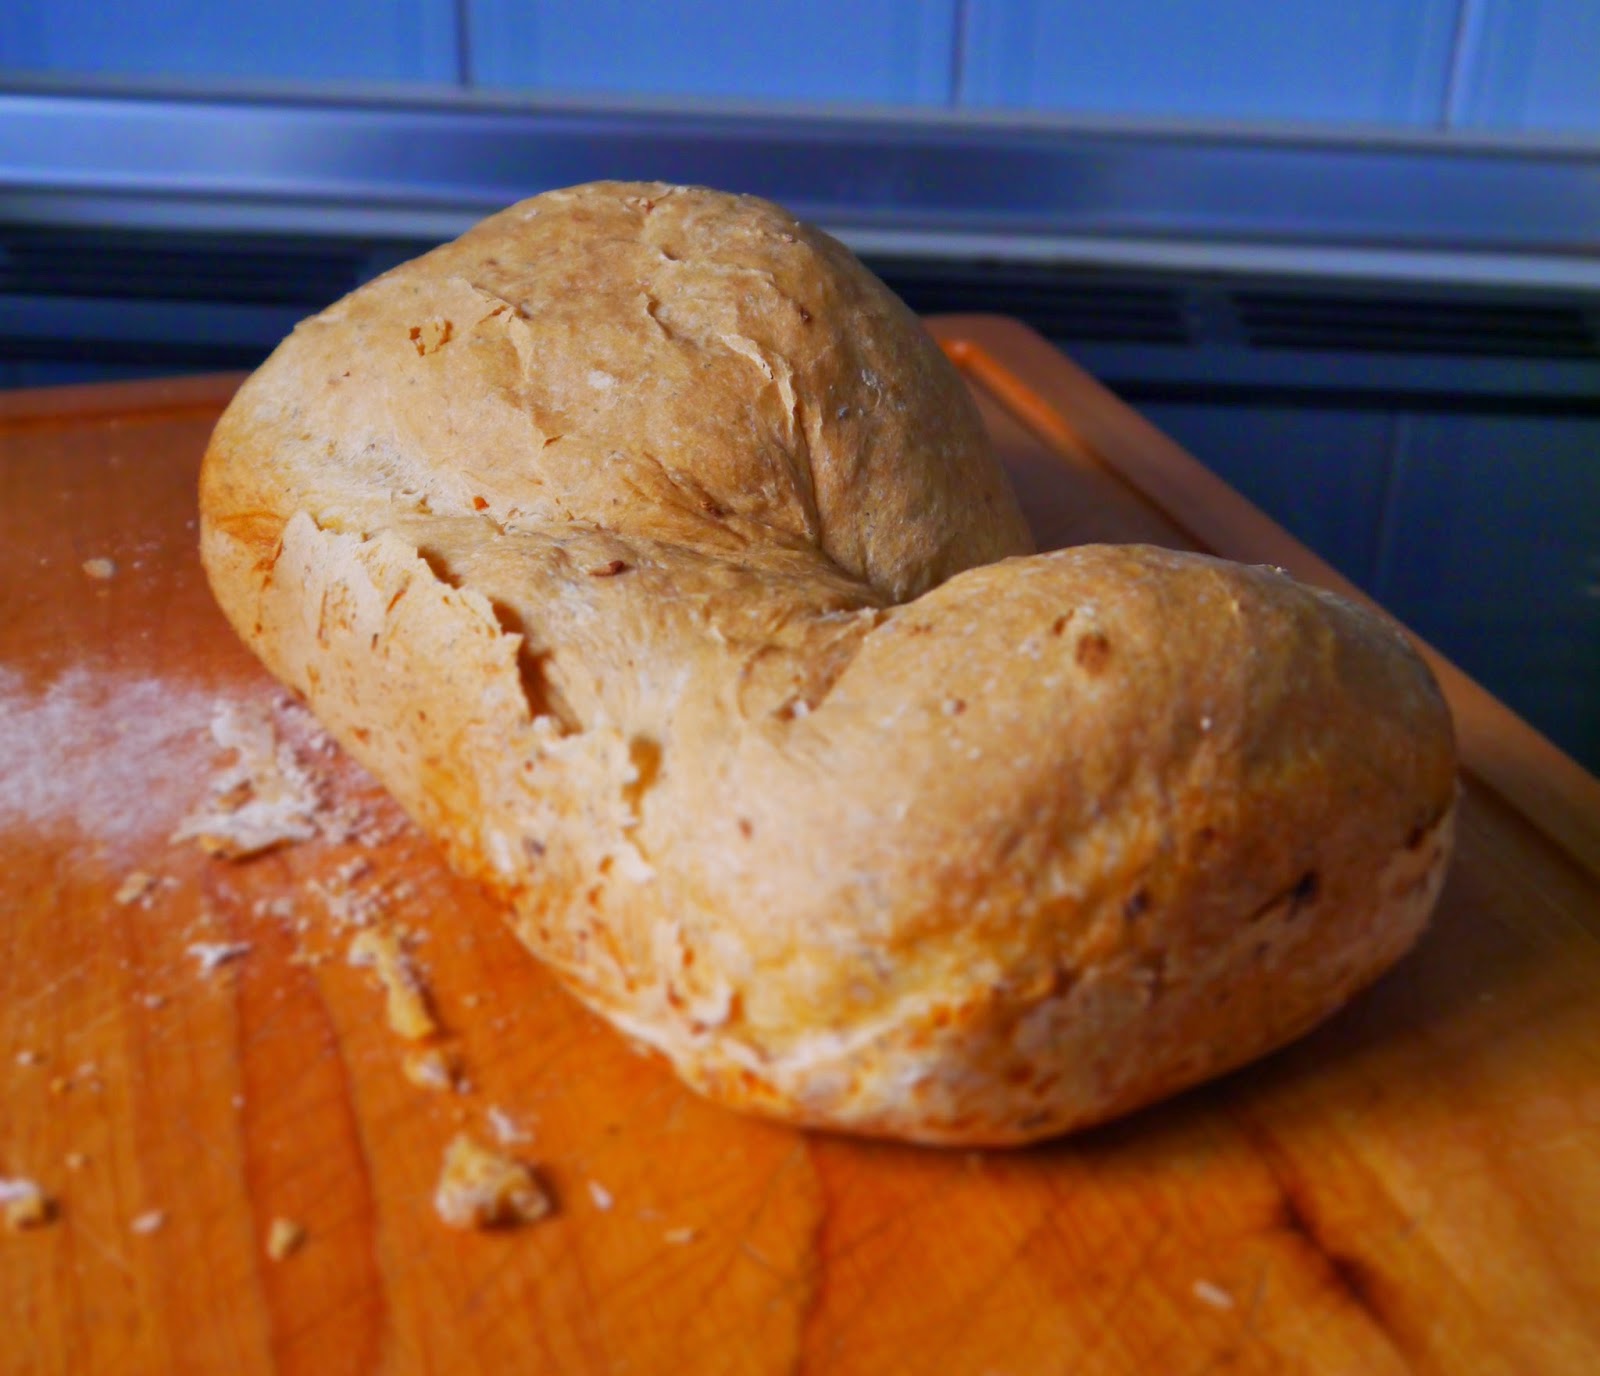 Funny-shaped bread from the breadmaker